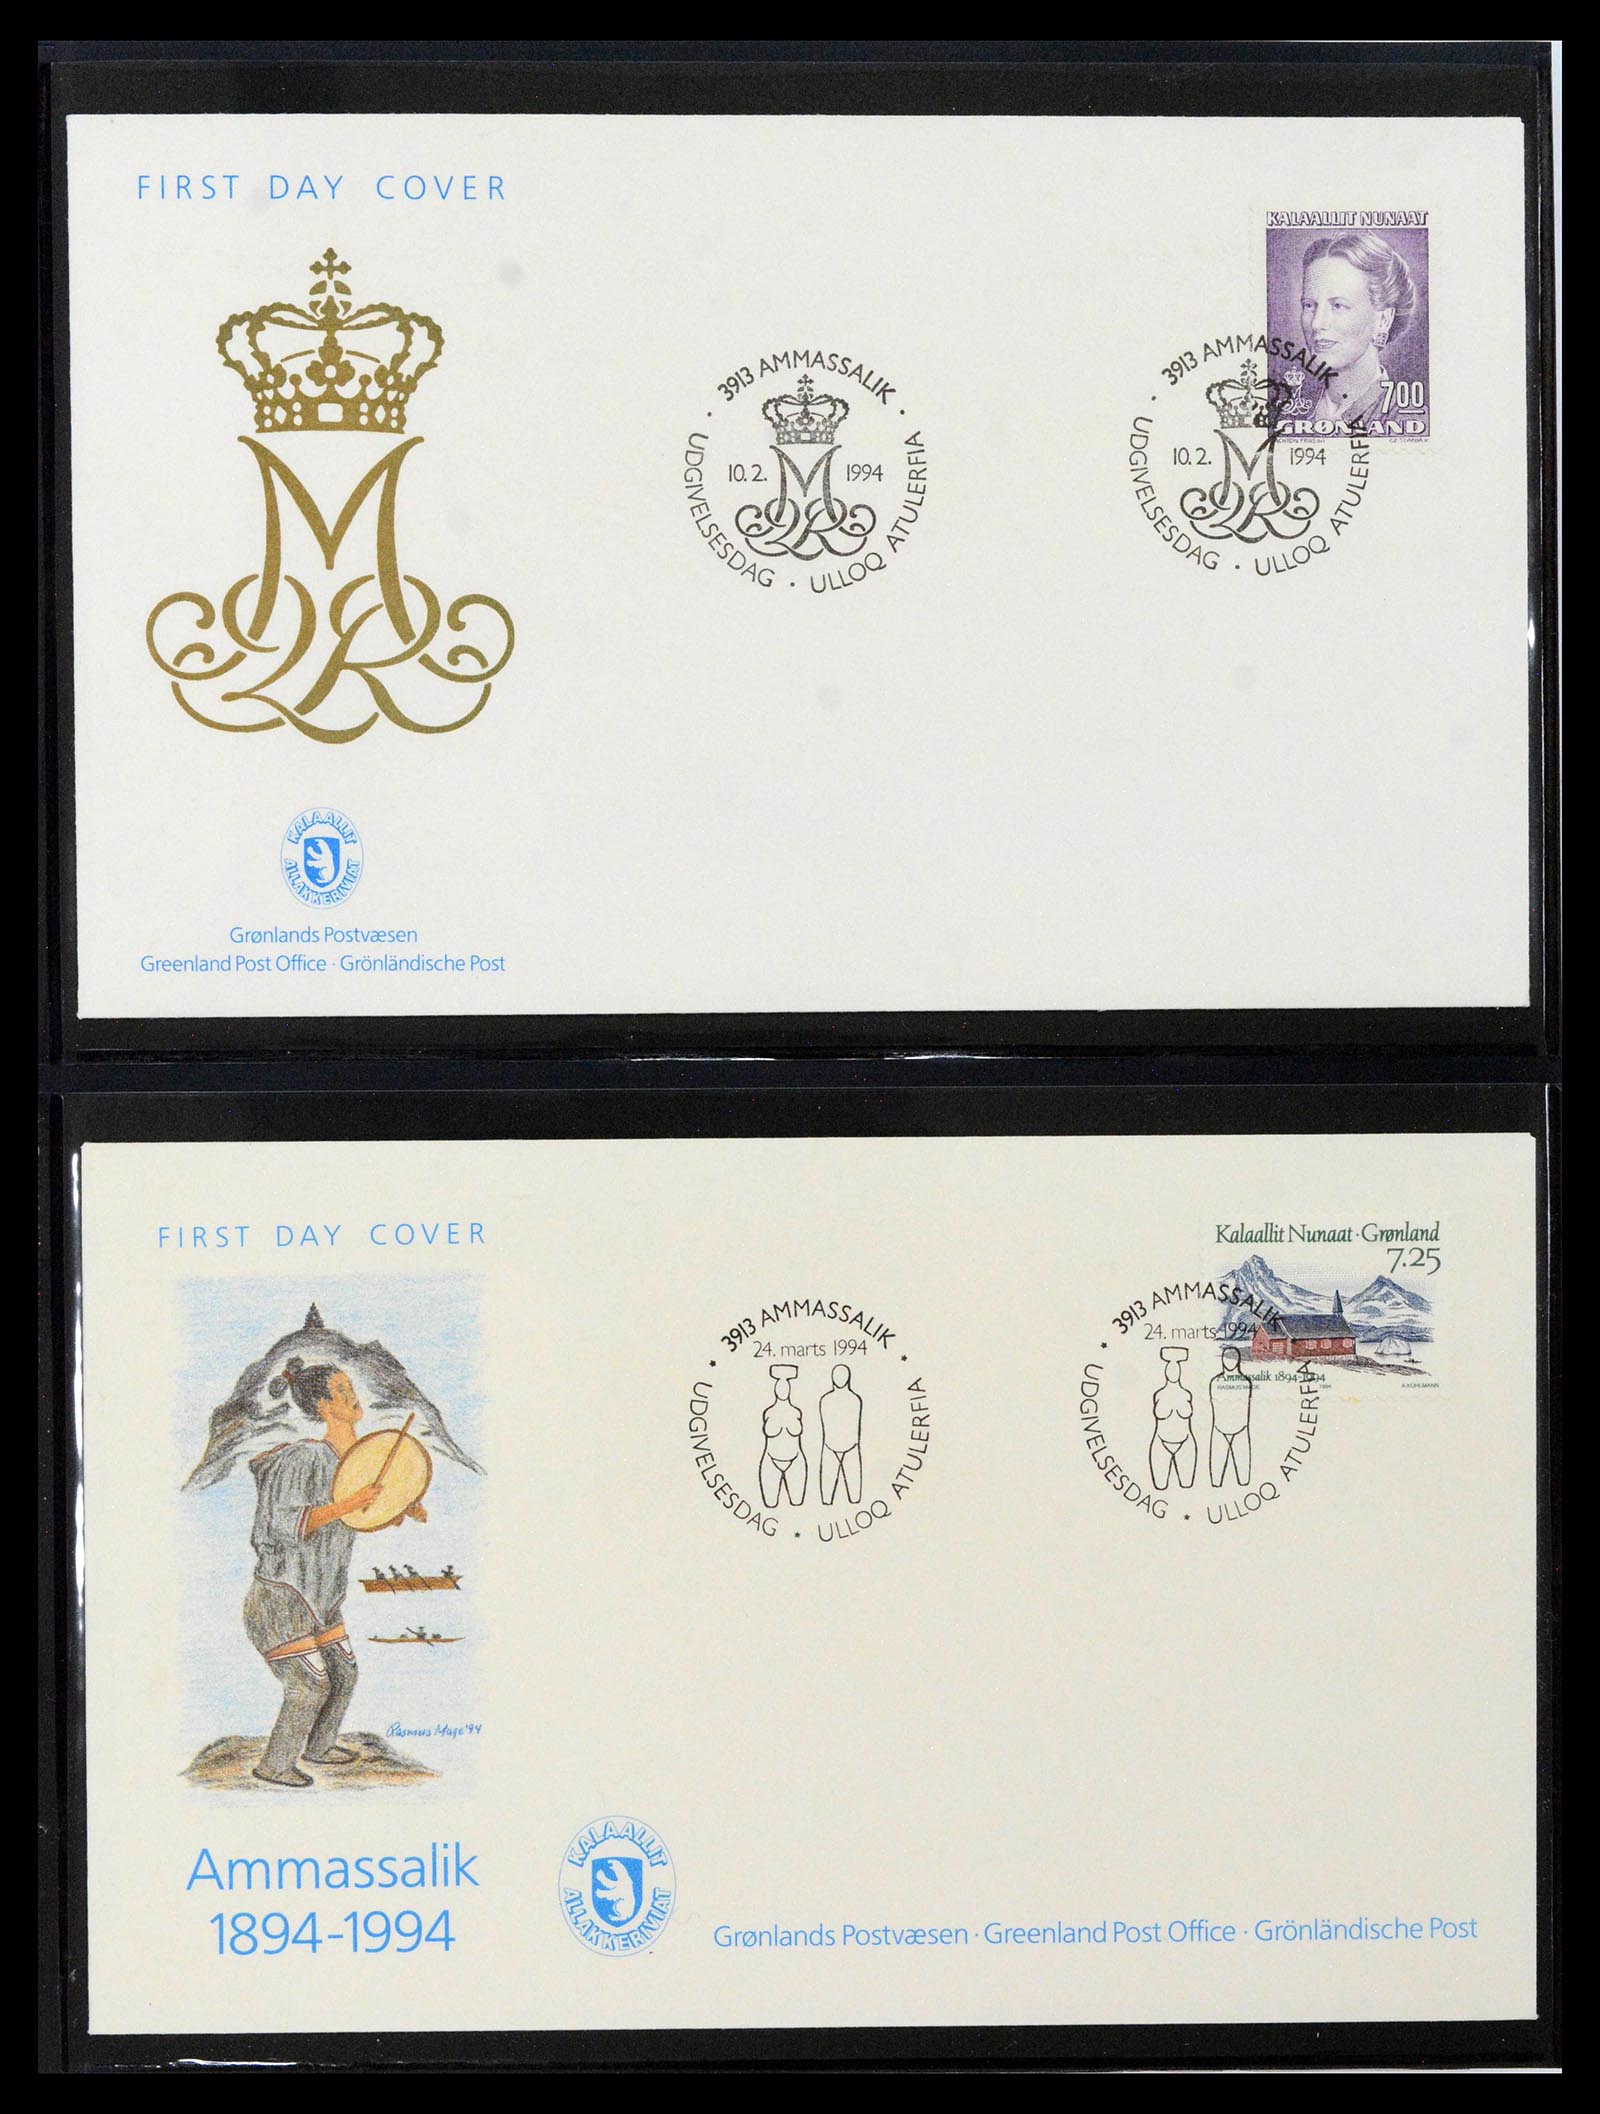 38824 0097 - Stamp collection 38824 Greenland first day covers 1950-2017.